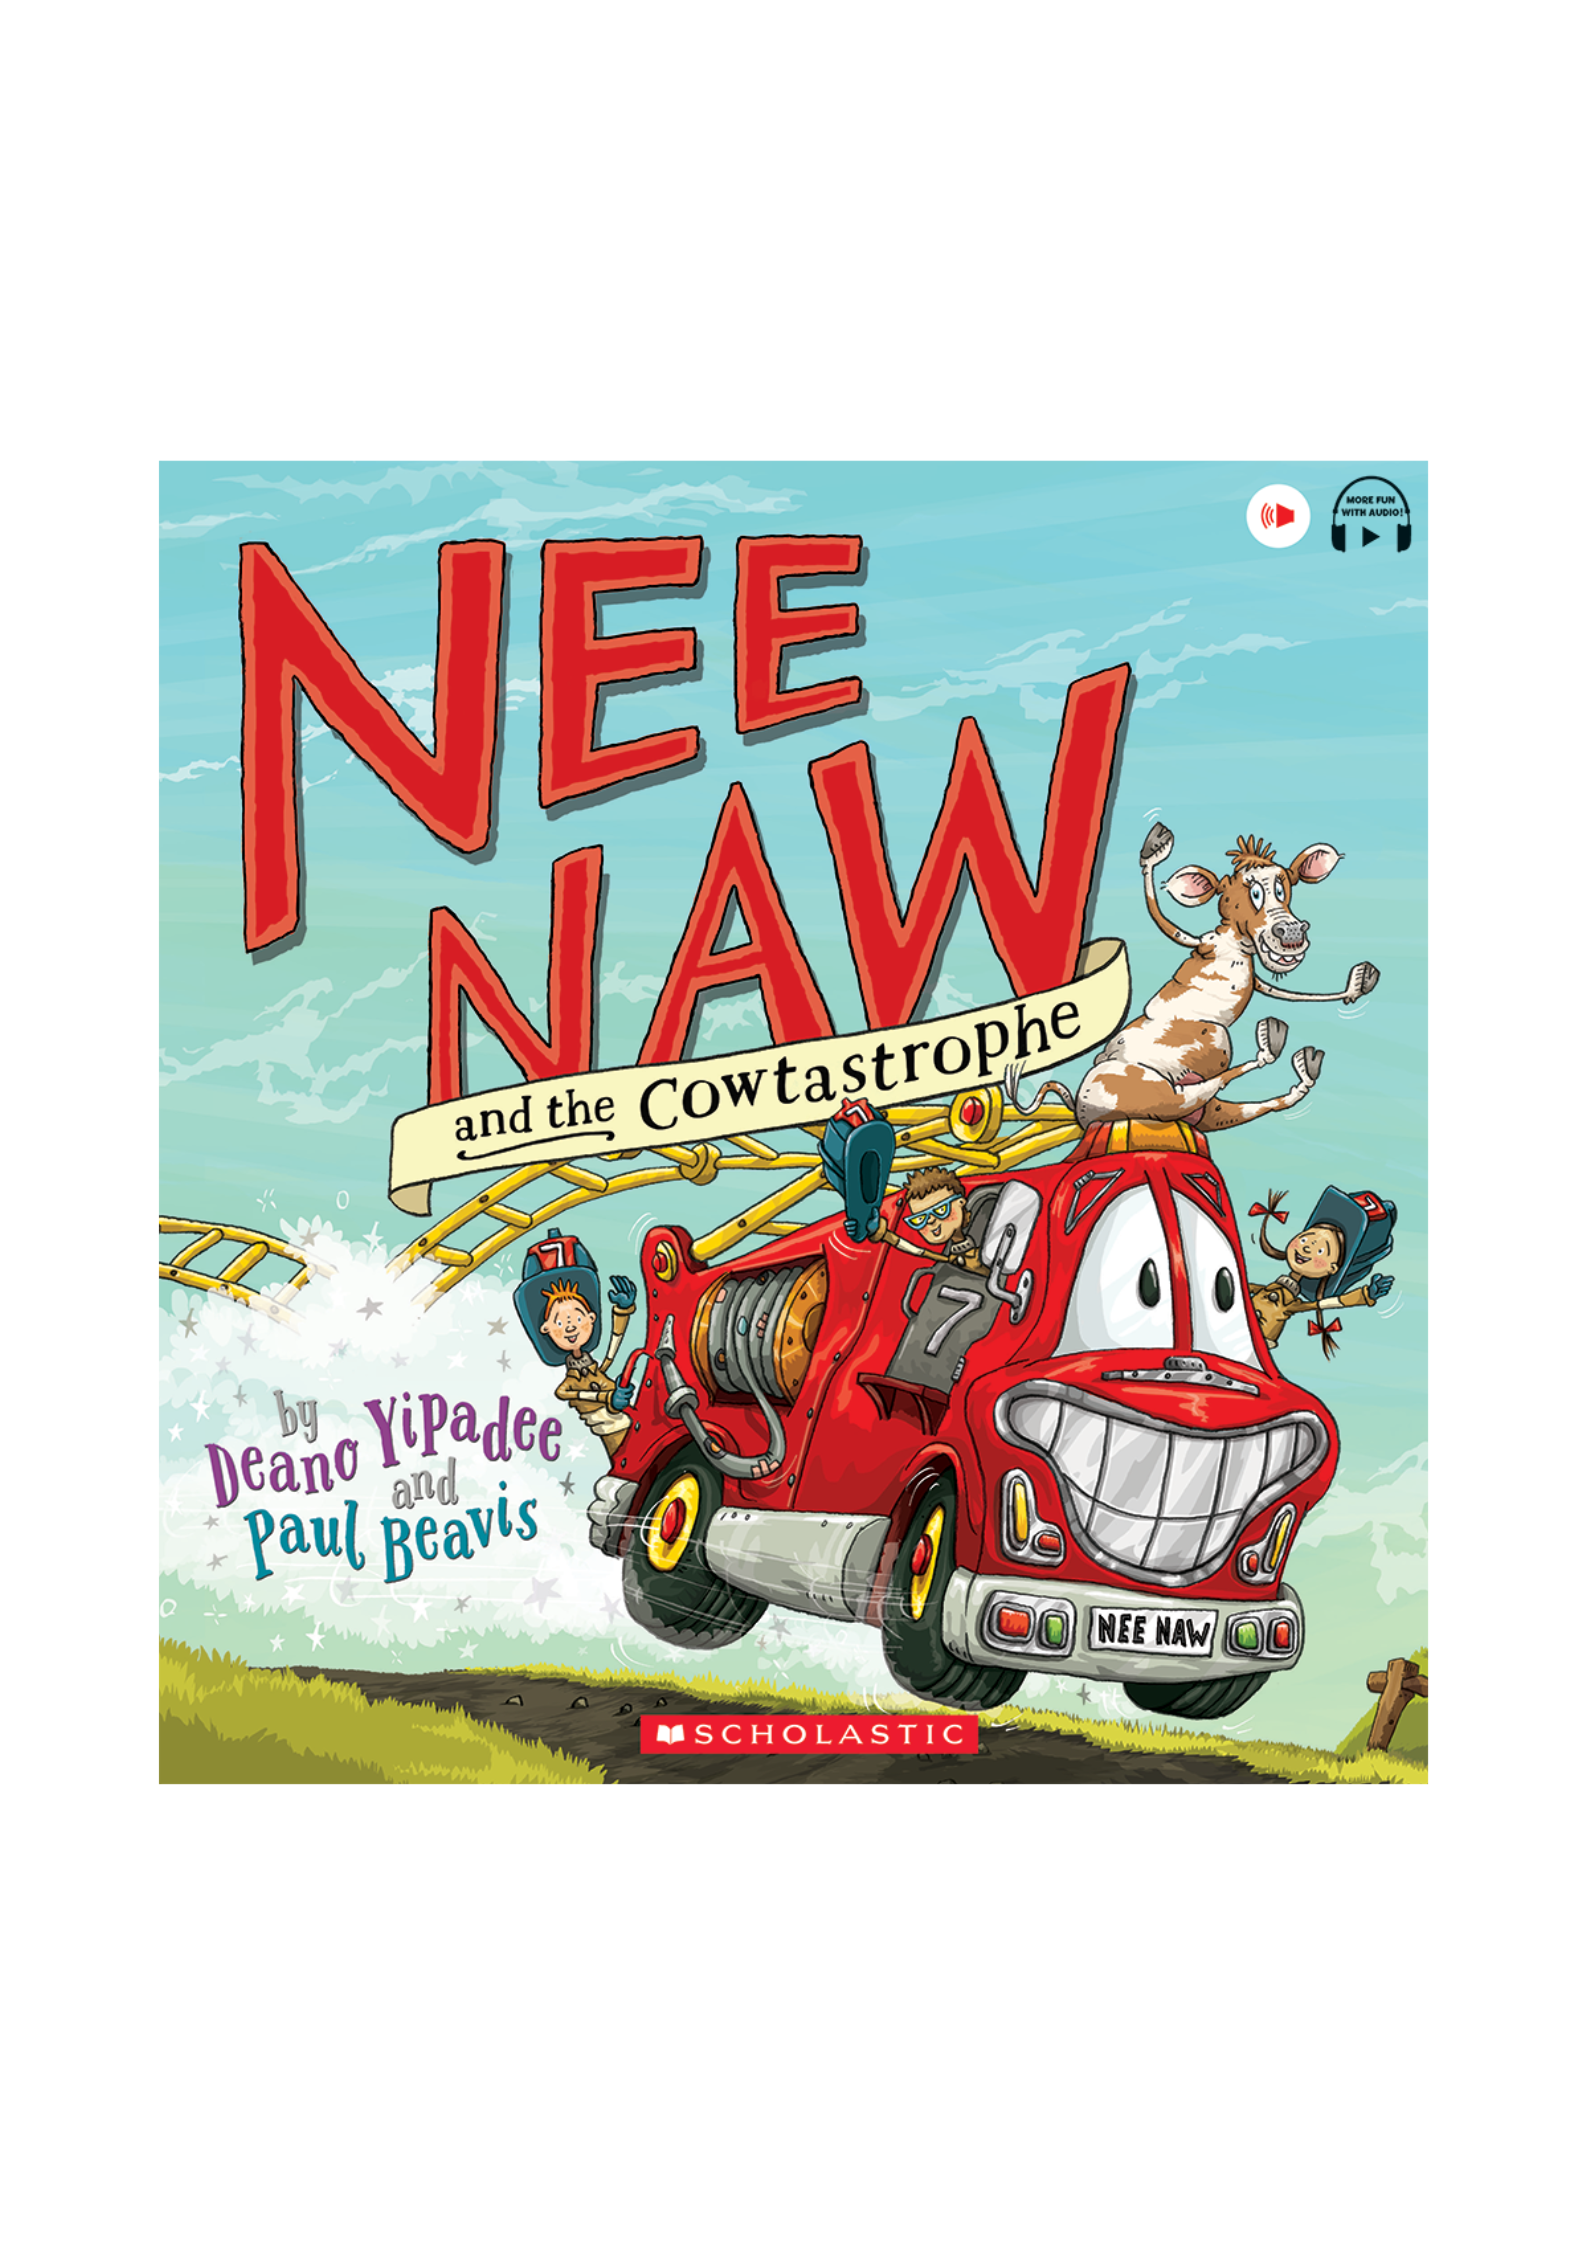 Nee Naw and The Cowtastrophe